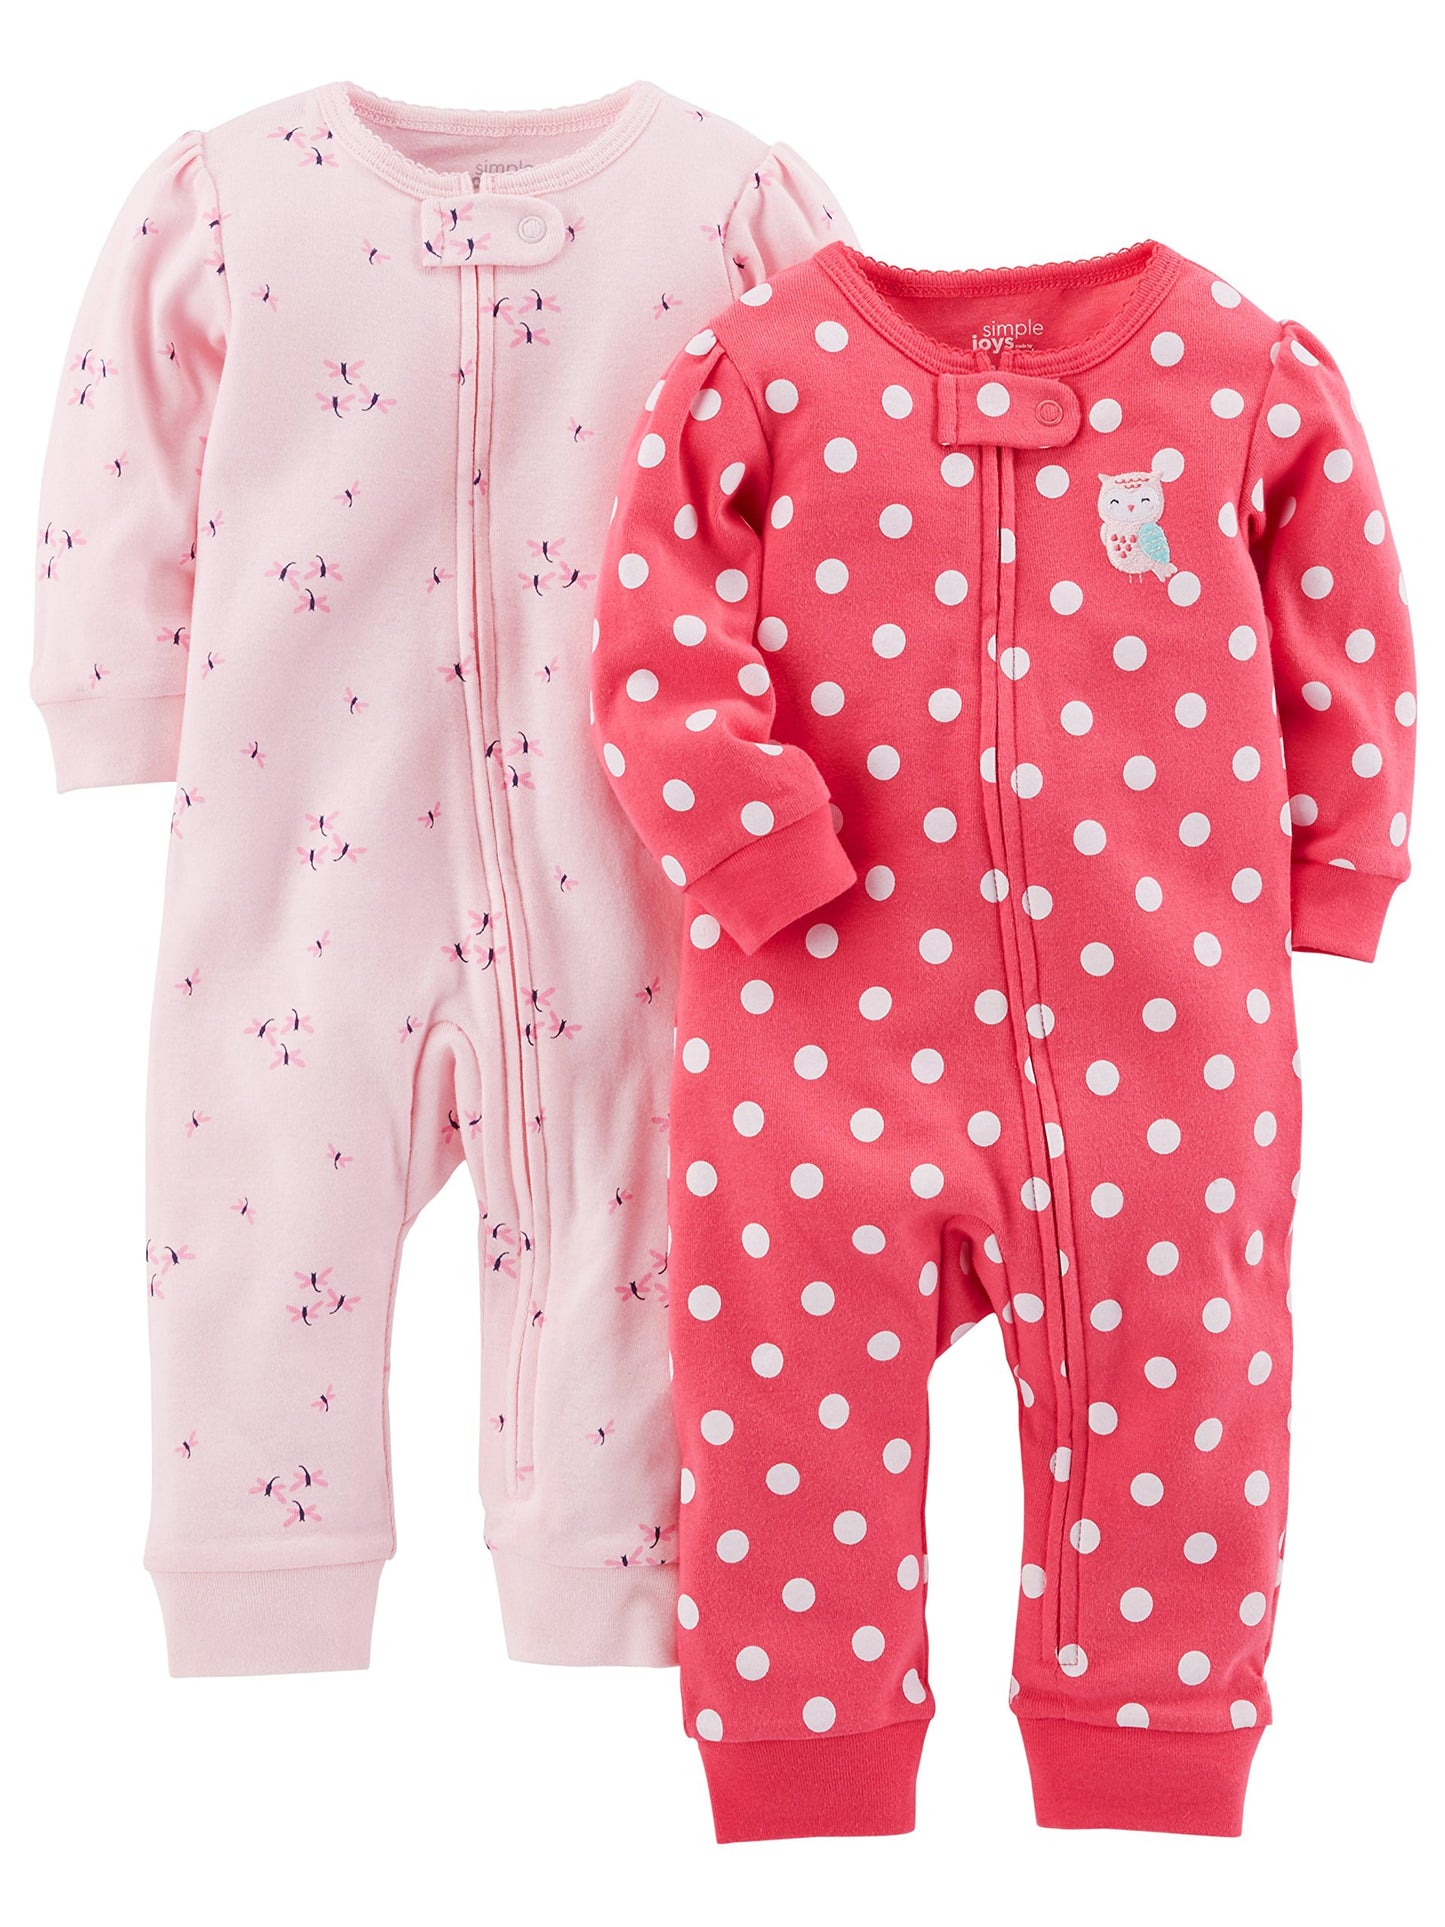 Simple Joys by Carter's Baby Girls' Cotton Footless Sleep and Play, Pack of 2 (3-6 Months)